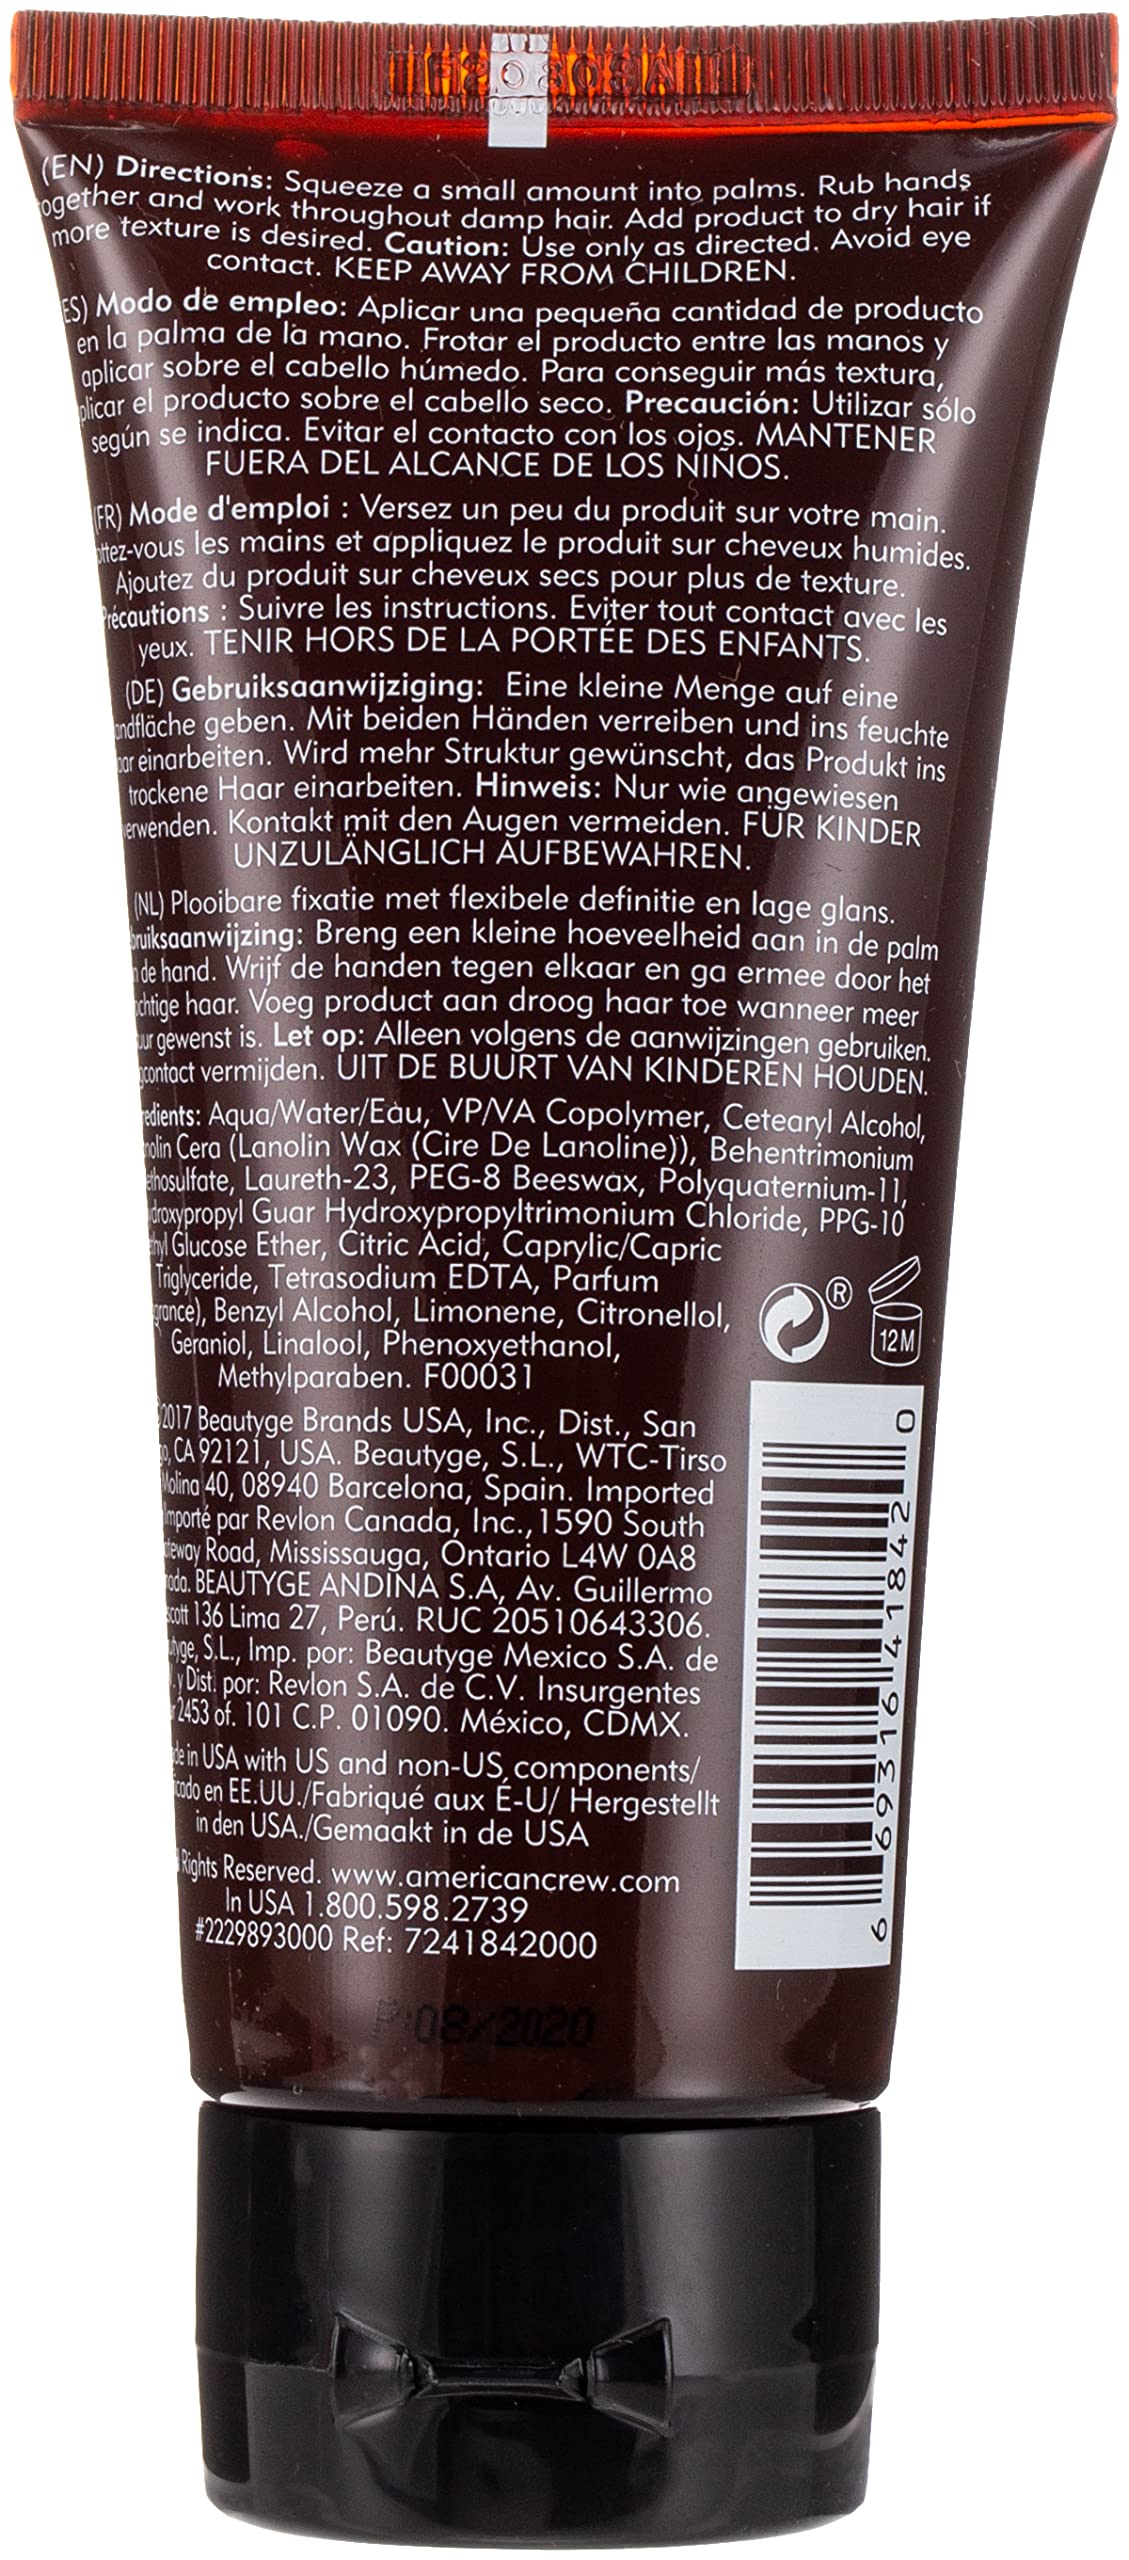 Men's Hair Styling Cream by American Crew, Like Hair Gel with Firm Hold with Low Shine, 3.3 Fl Oz